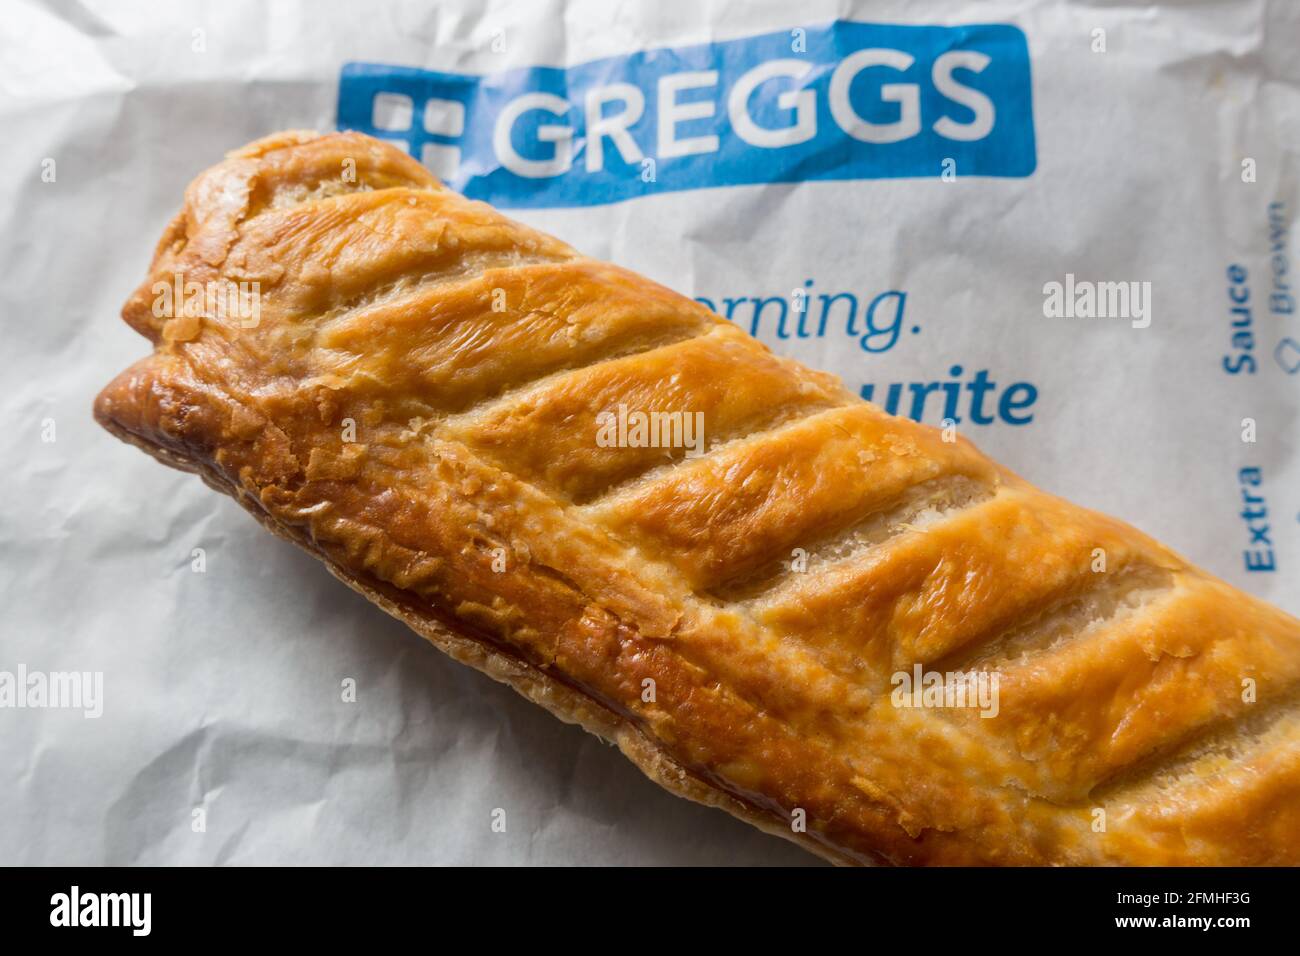 Sausage roll sausage meat wrapped in layers of crisp by Greggs